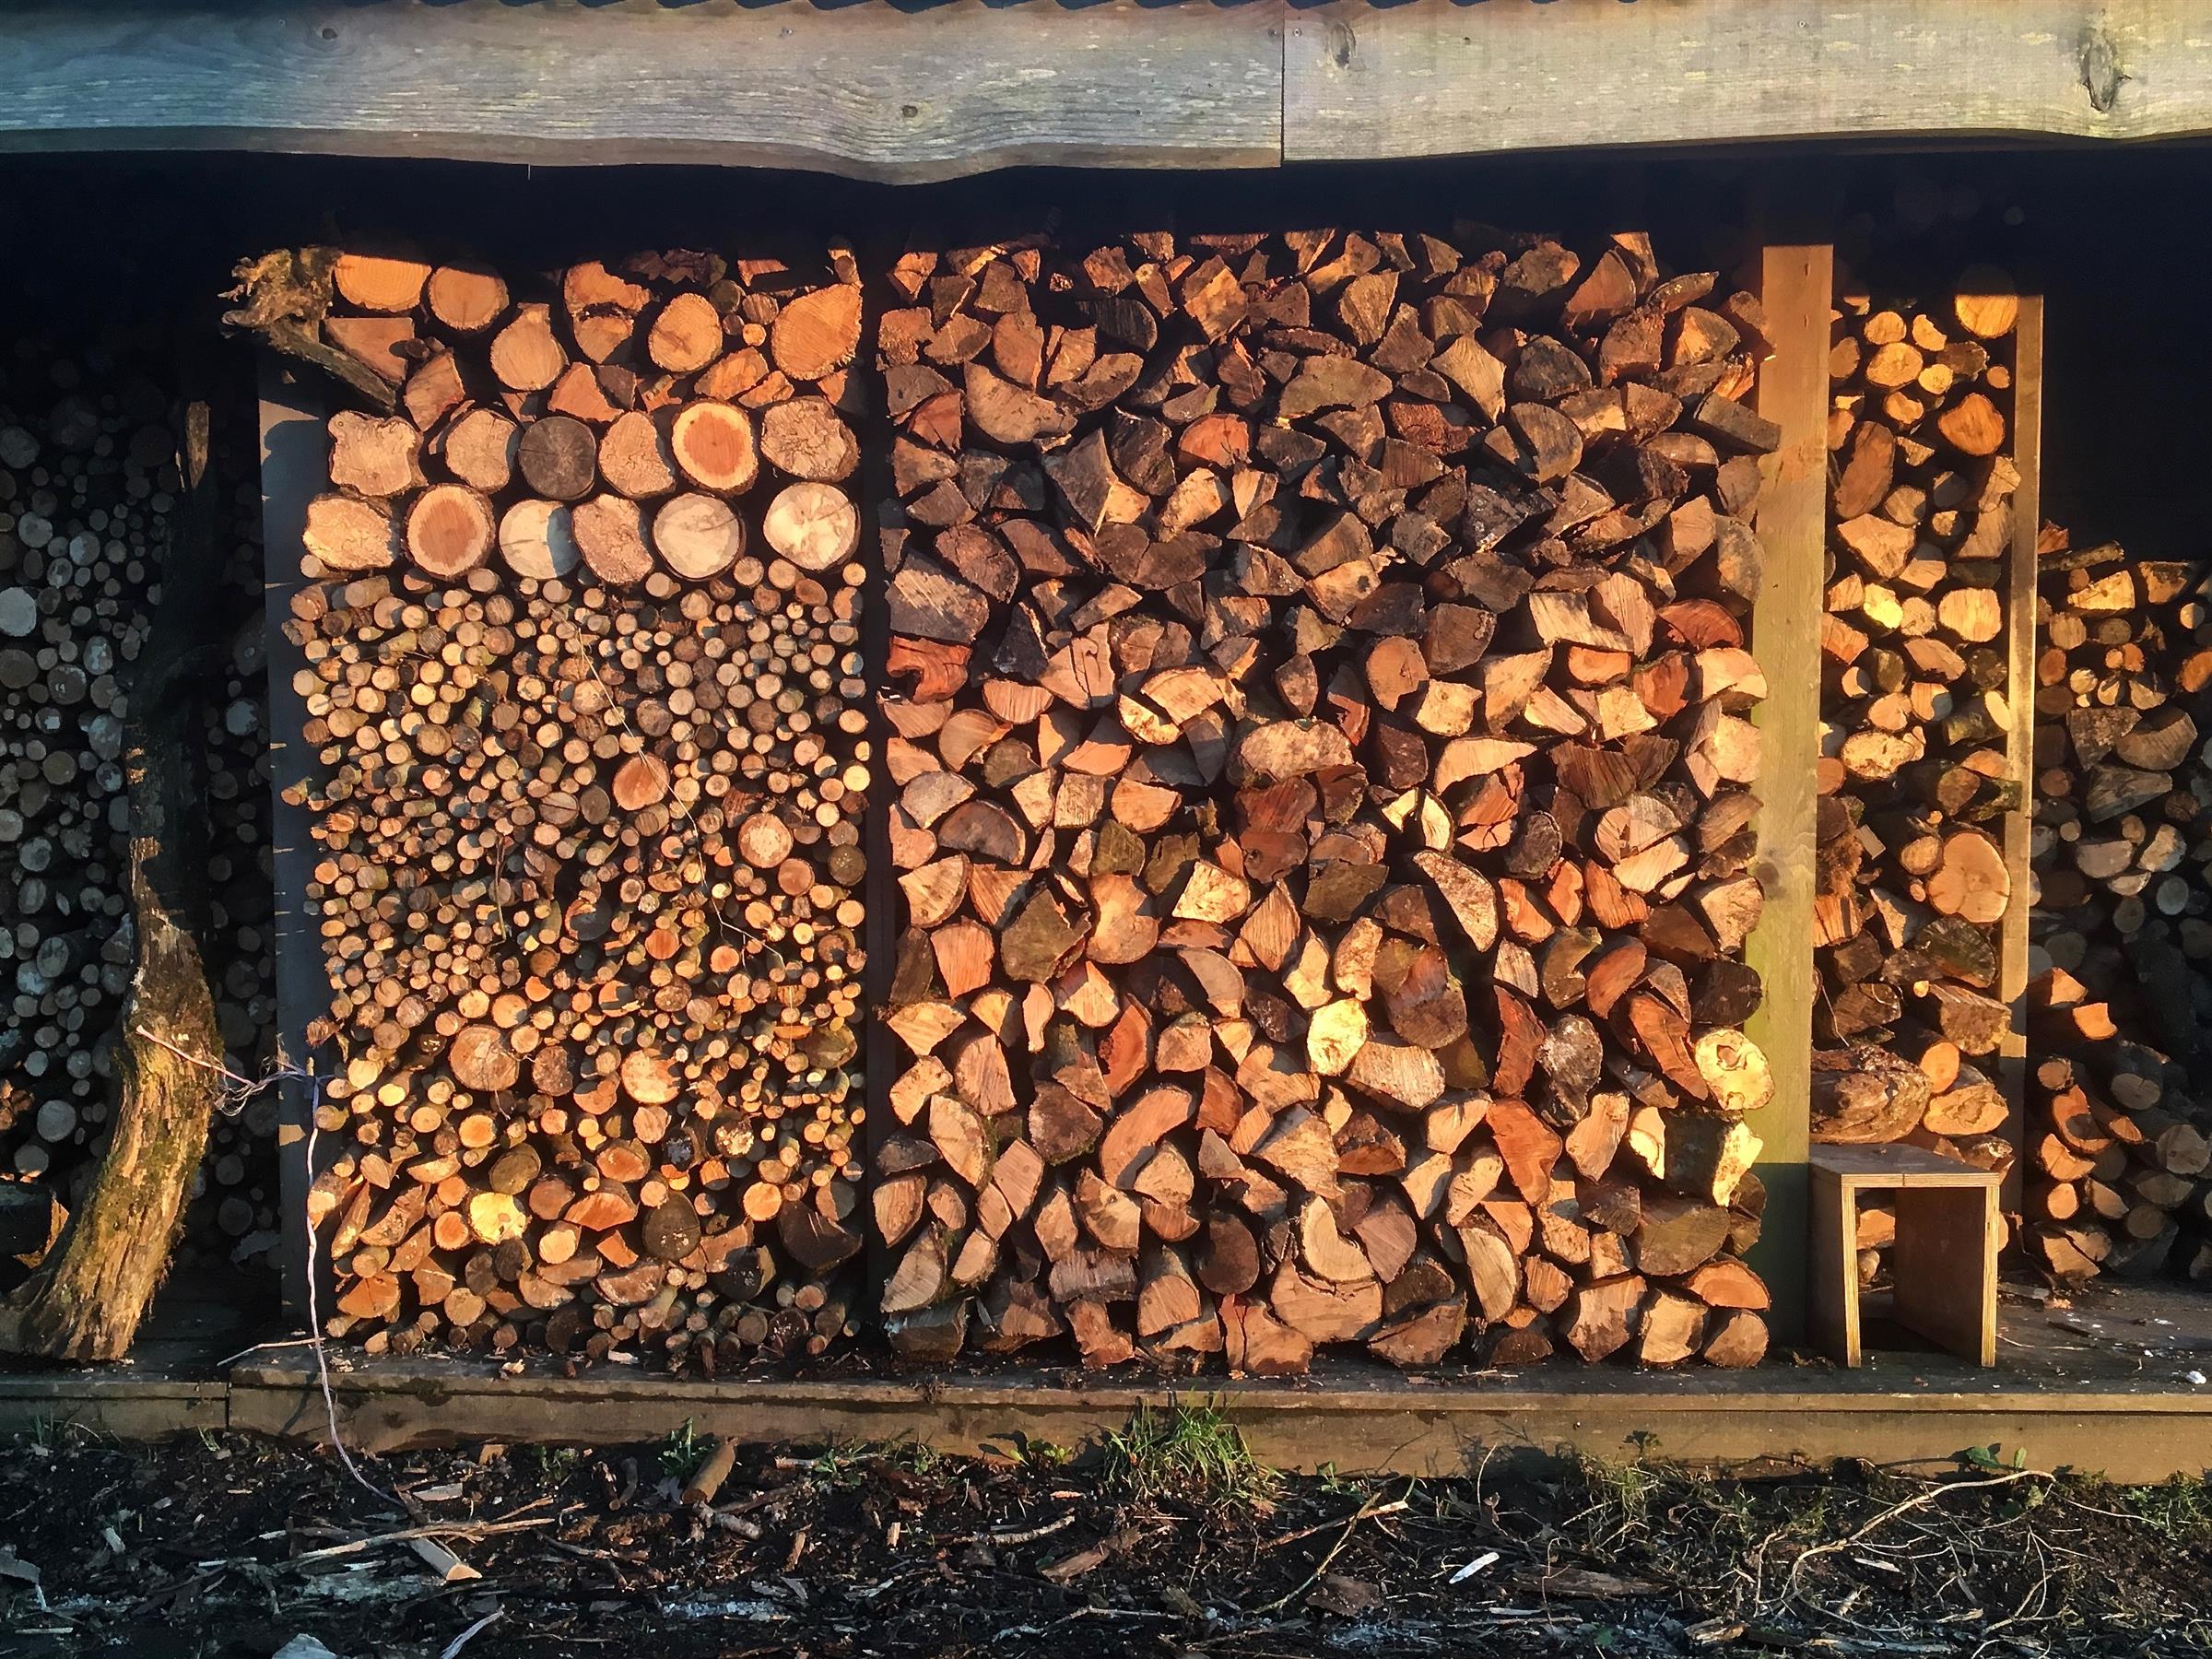 All the firewood is sourced from Sunnybank woodlands